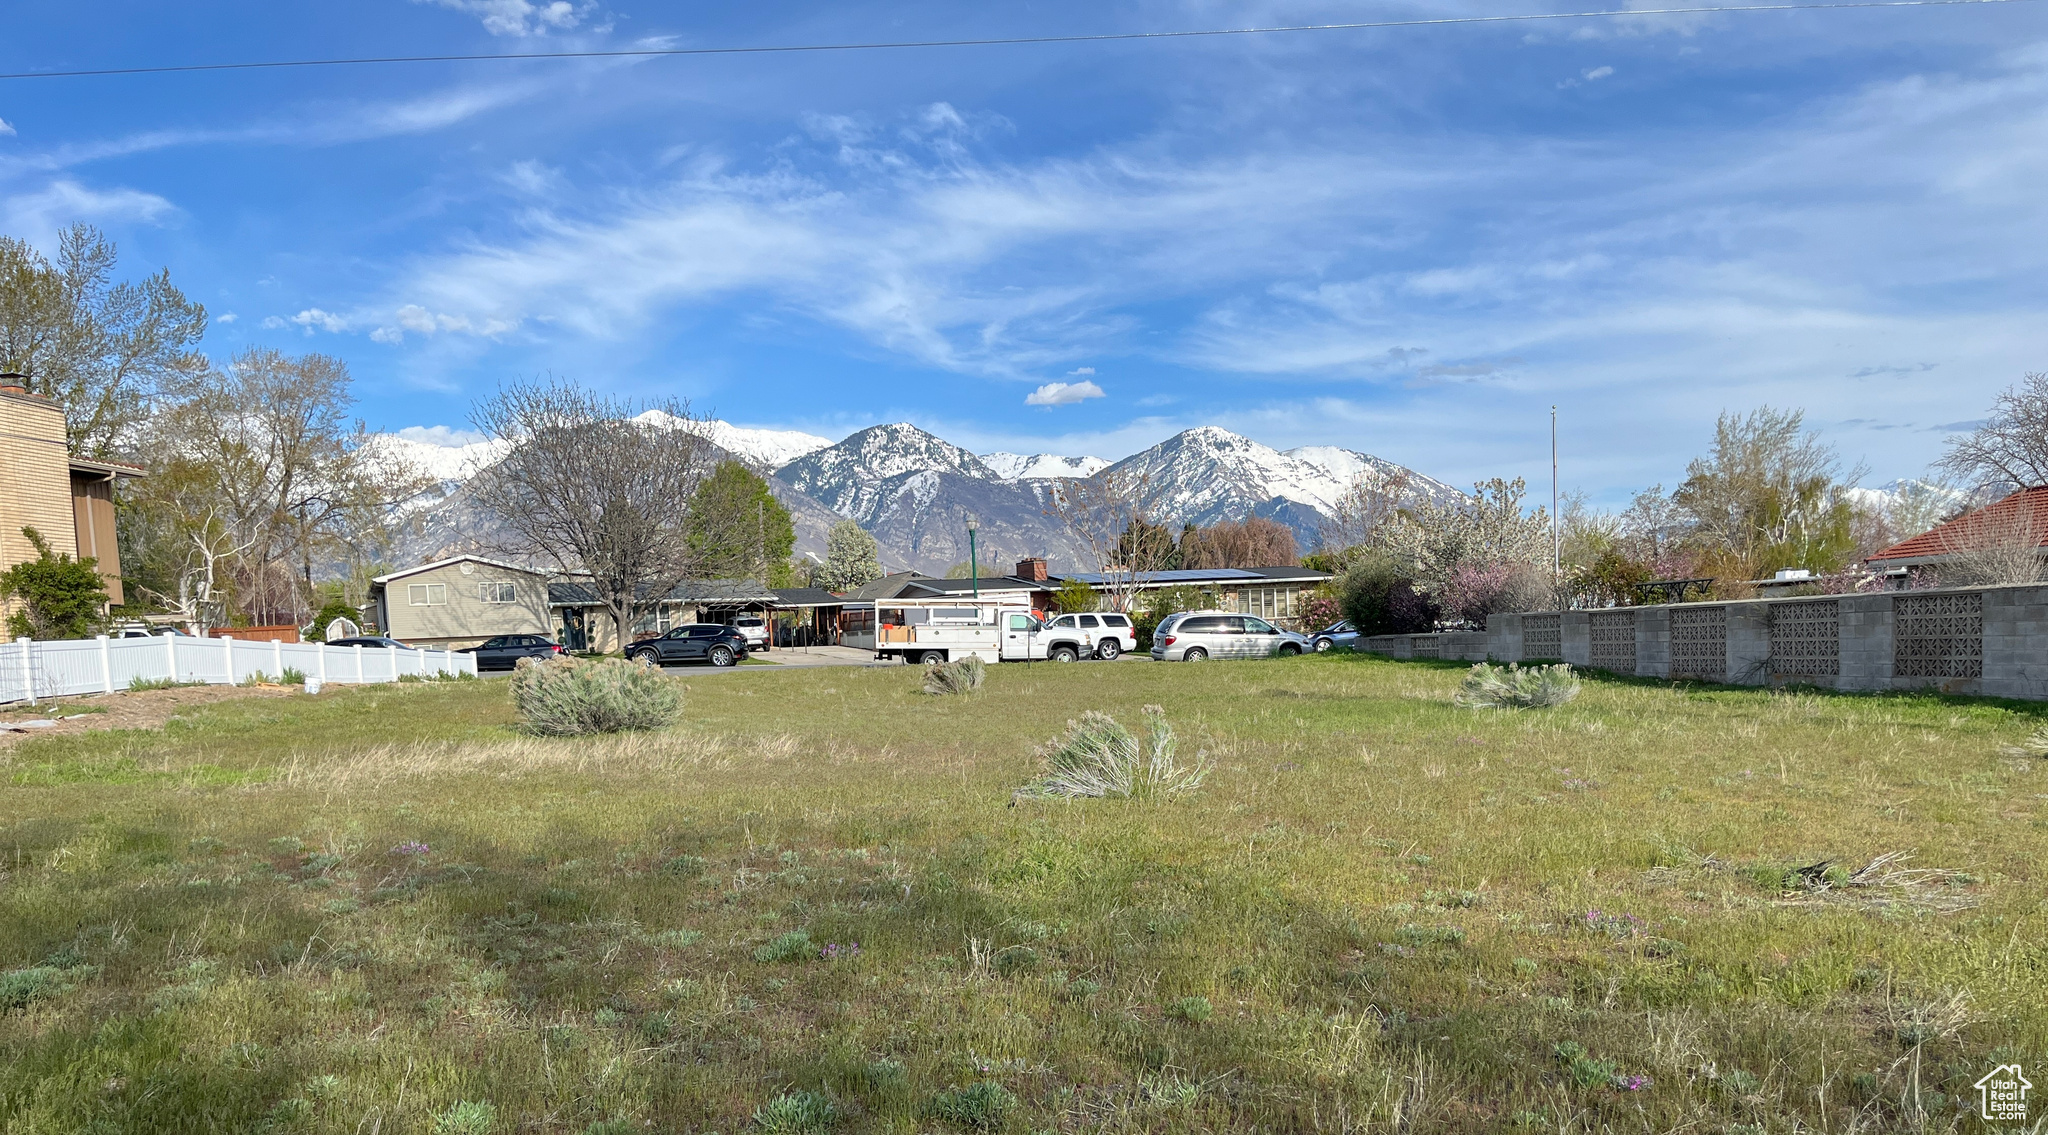 View from the back of the lot looking East towards the Wasatch Mountains.